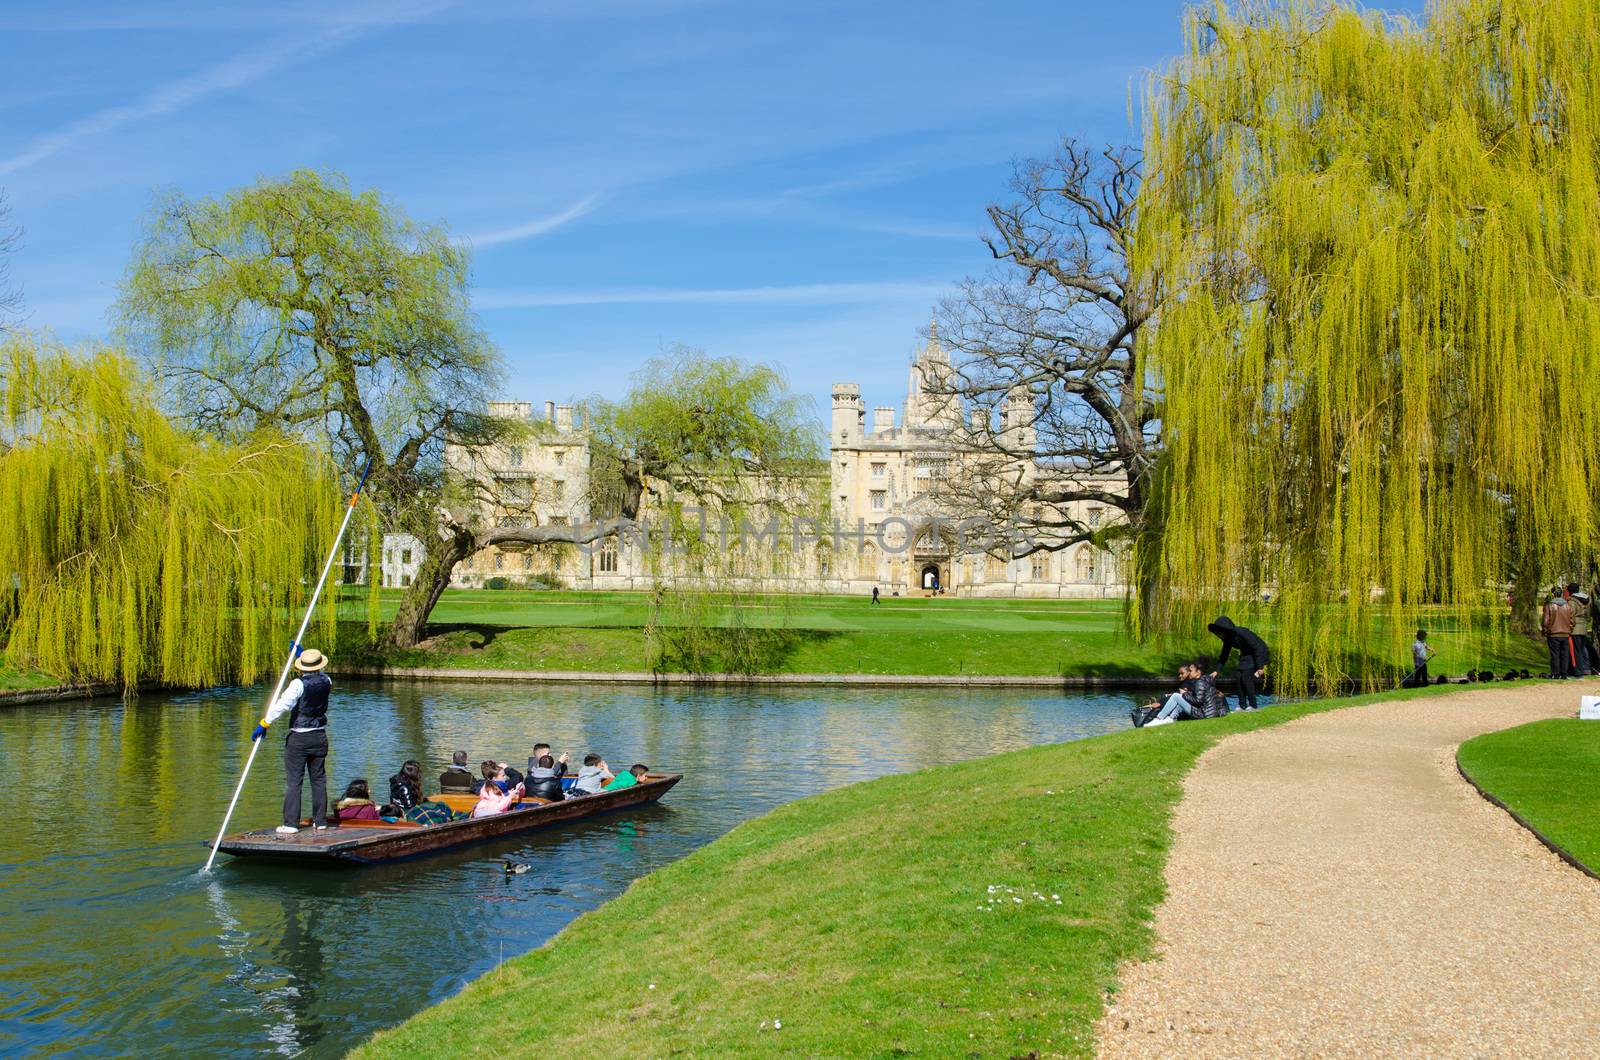 Punting on river Cam on a sunny day, Cambridge, UK by mauricallari